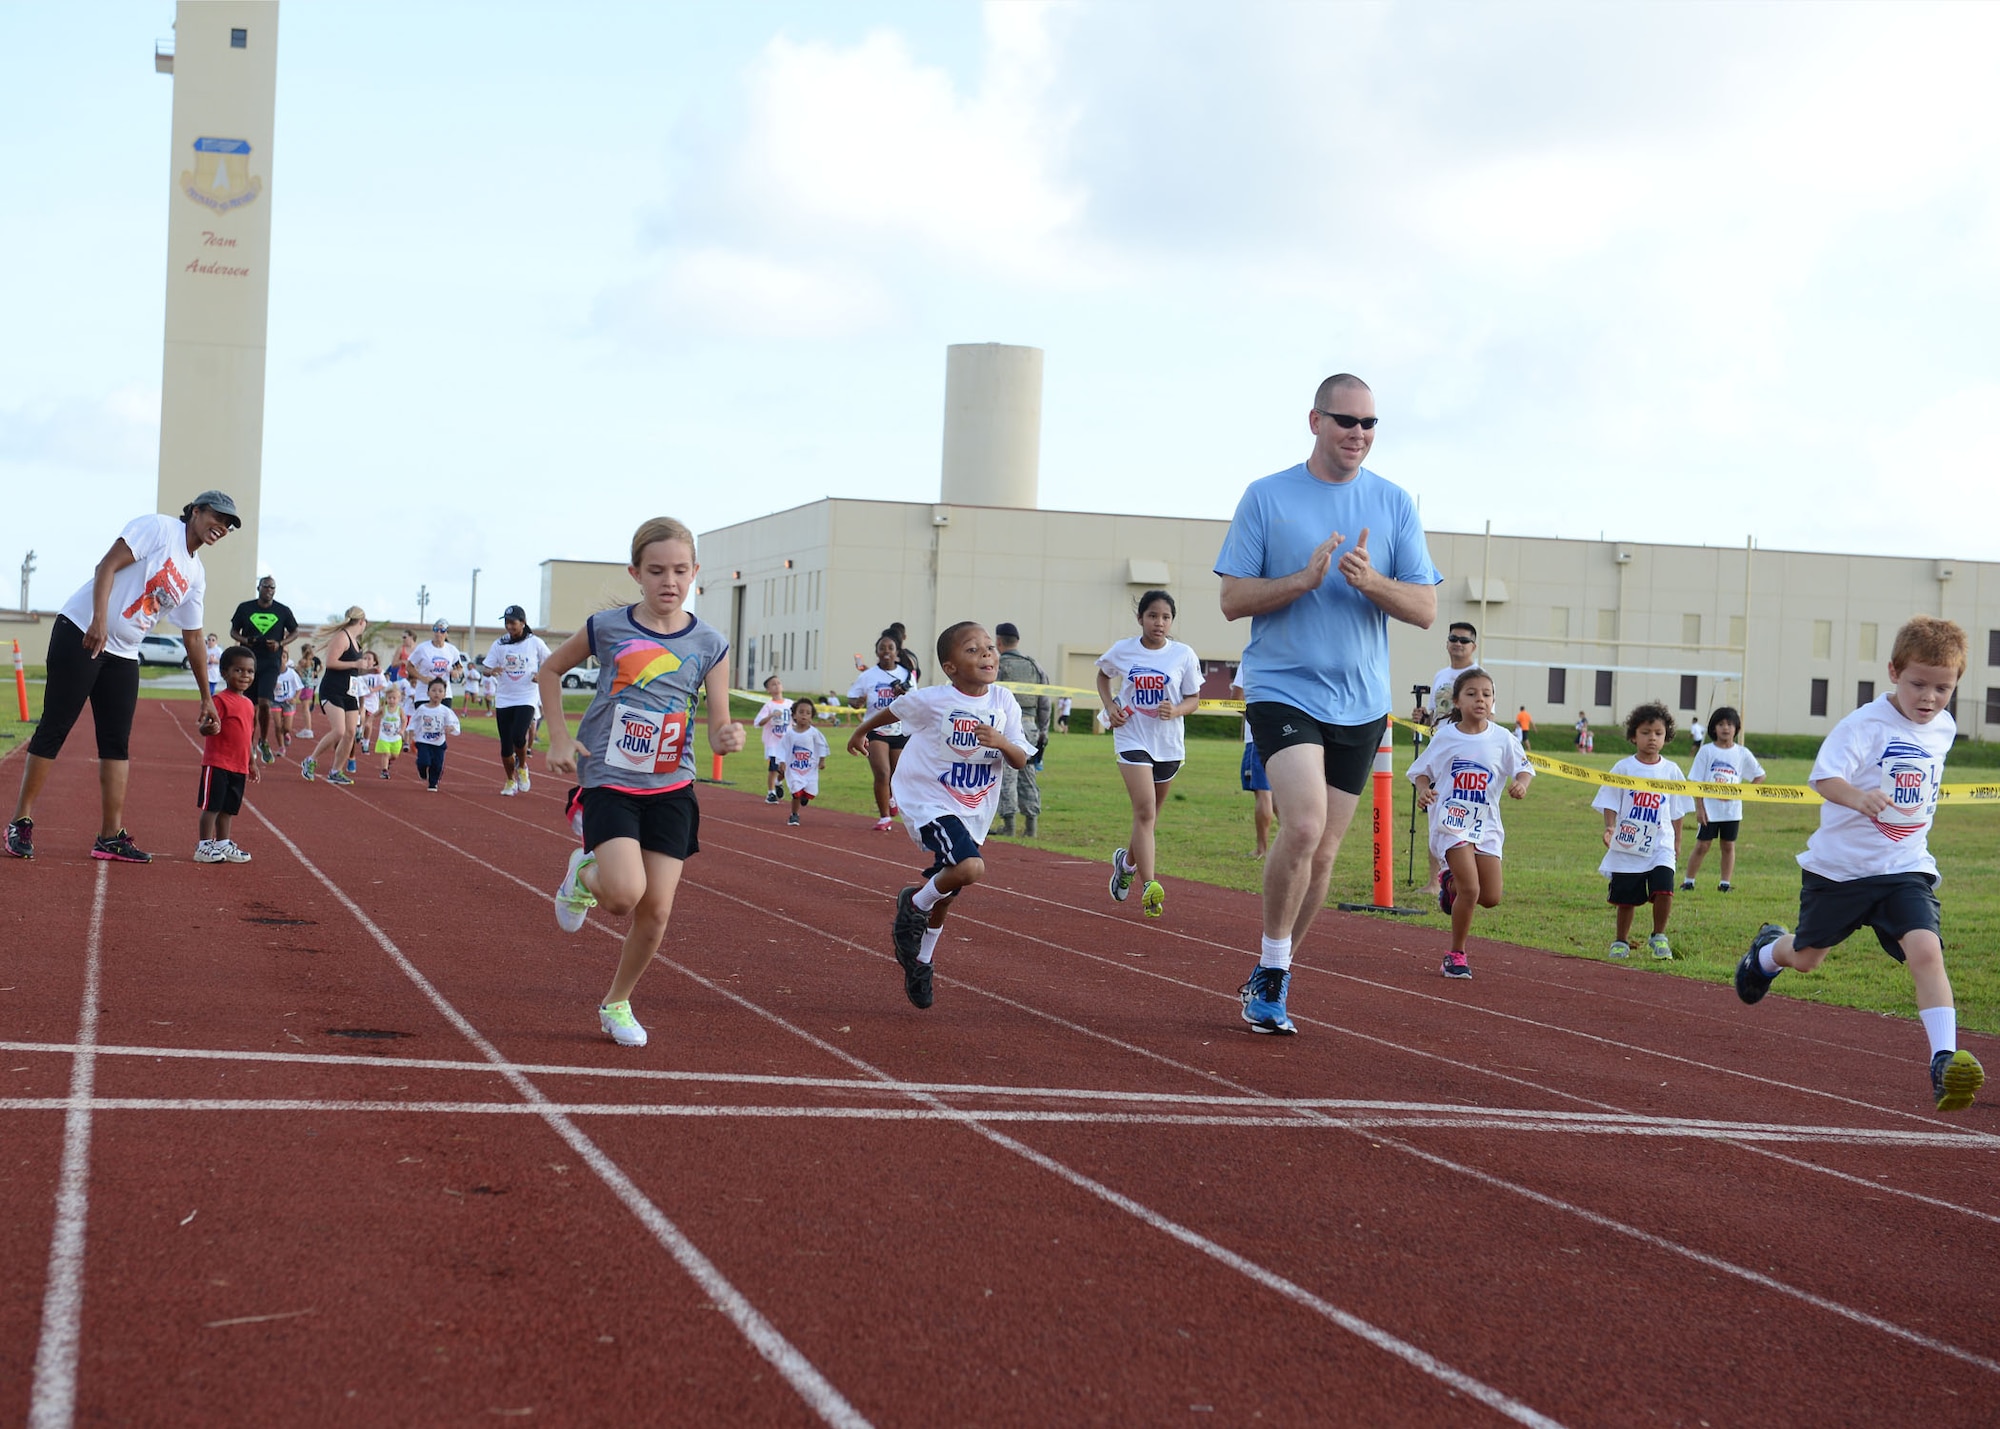 Parents and children race for the fastest time during the America’s Kids Run May 25, 2015, at Andersen Air Force Base, Guam. Depending on age, children ran anywhere from 1/2 a mile to two miles as part of Armed Forces Day activities. (U.S. Air Force photo by Airman 1st Class Joshua Smoot/Released)